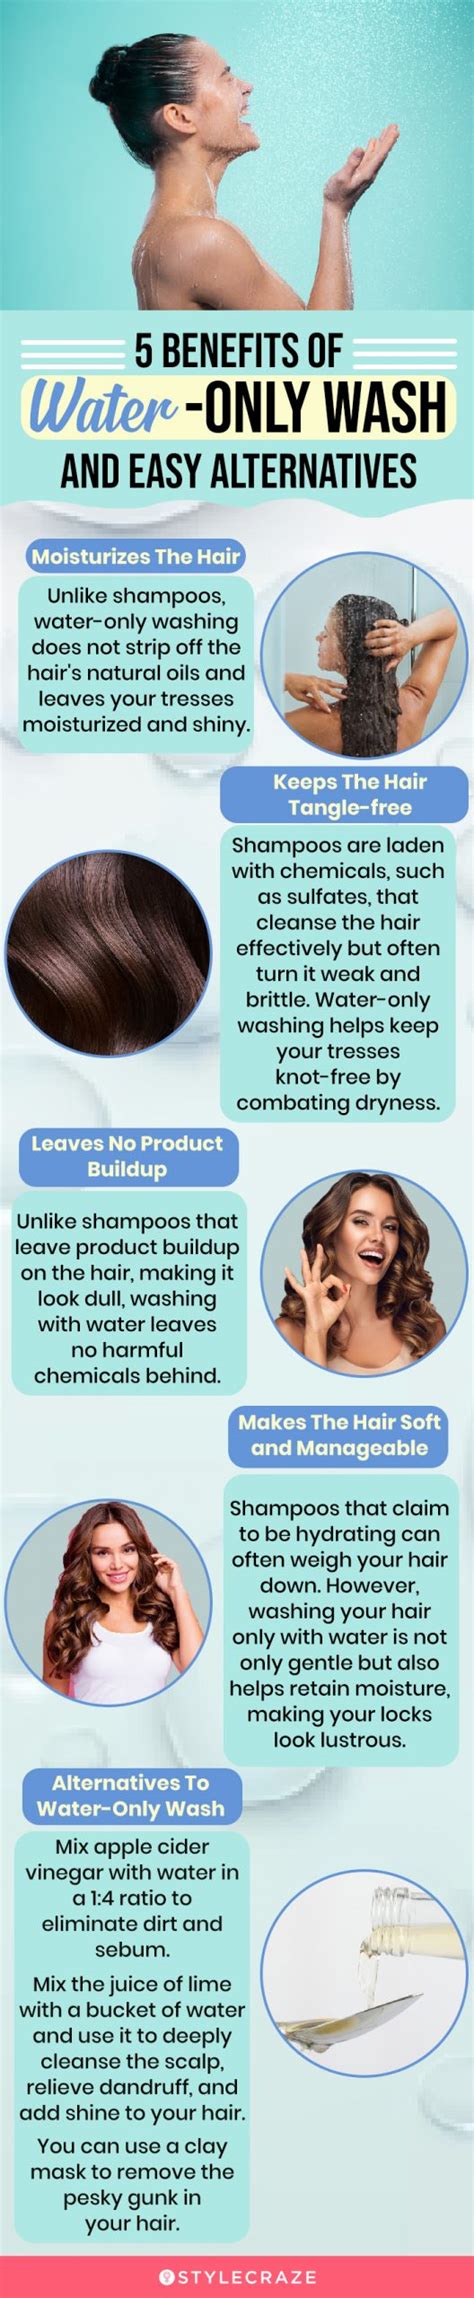 How can I hydrate my hair without washing it?